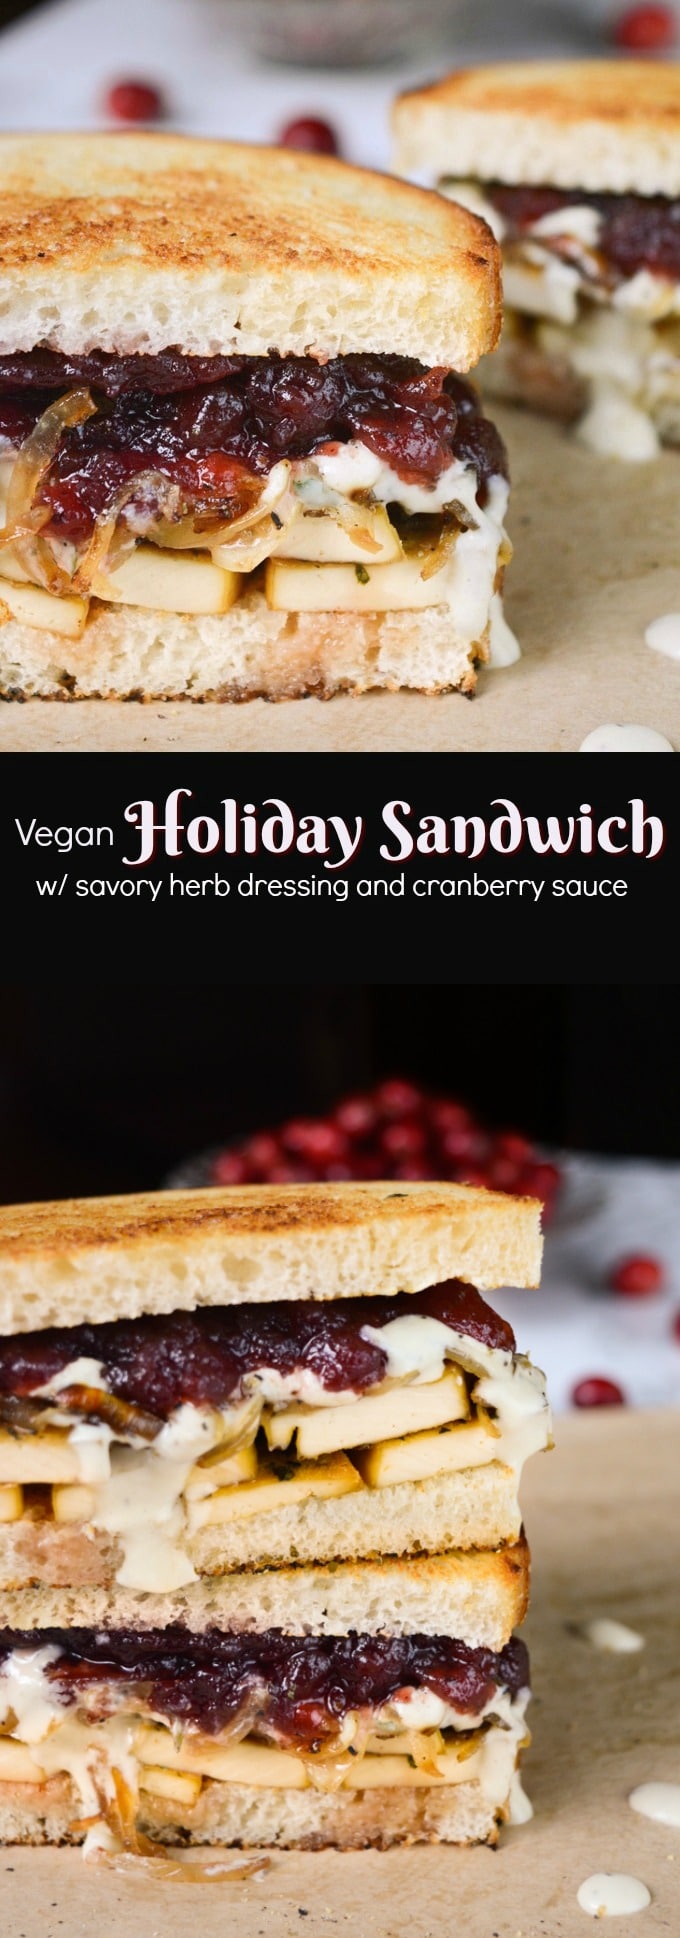 This isn’t your average vegan sandwich. It’s a flavor packed vegan holiday sandwich brought together by an herb and cranberry taste reminiscent of the holidays. The taste is so classic you would never know this sandwich was vegan!